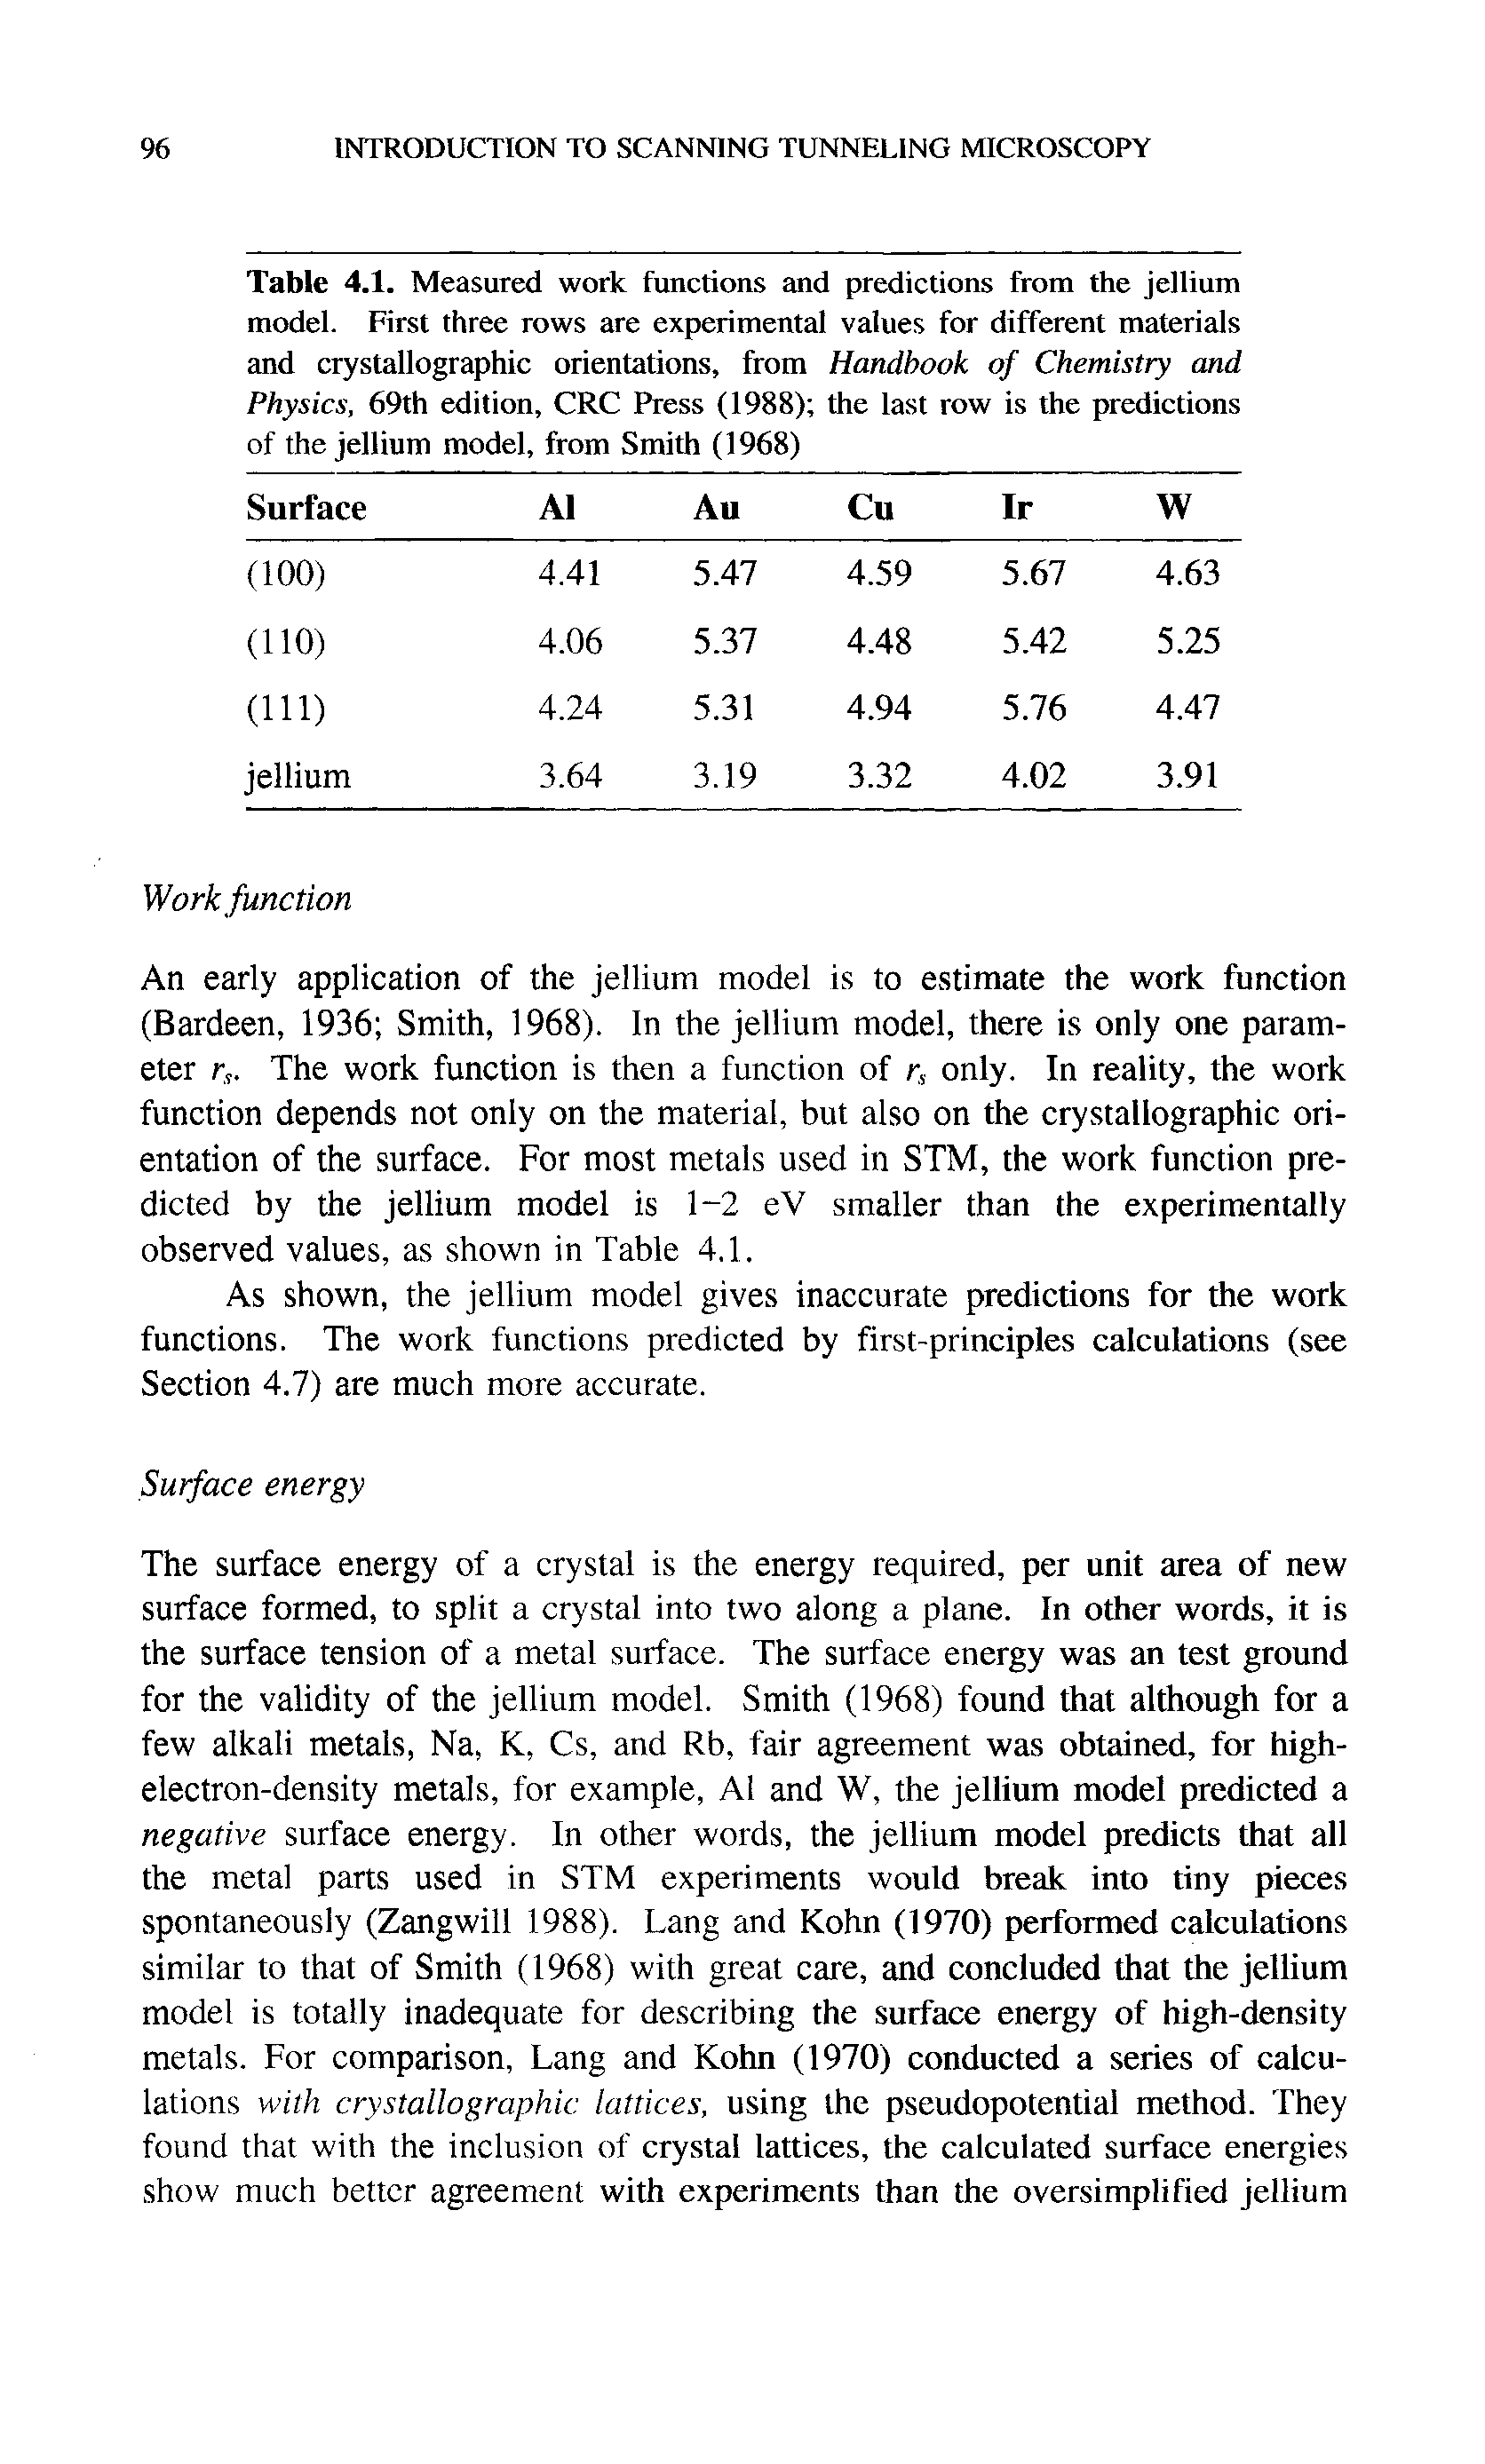 Table 4.1. Measured work functions and predictions from the jellium model. First three rows are experimental values for different materials and crystallographic orientations, from Handbook of Chemistry and Physics, 69th edition, CRC Press (1988) the last row is the predictions of the jellium model, from Smith (1968)...